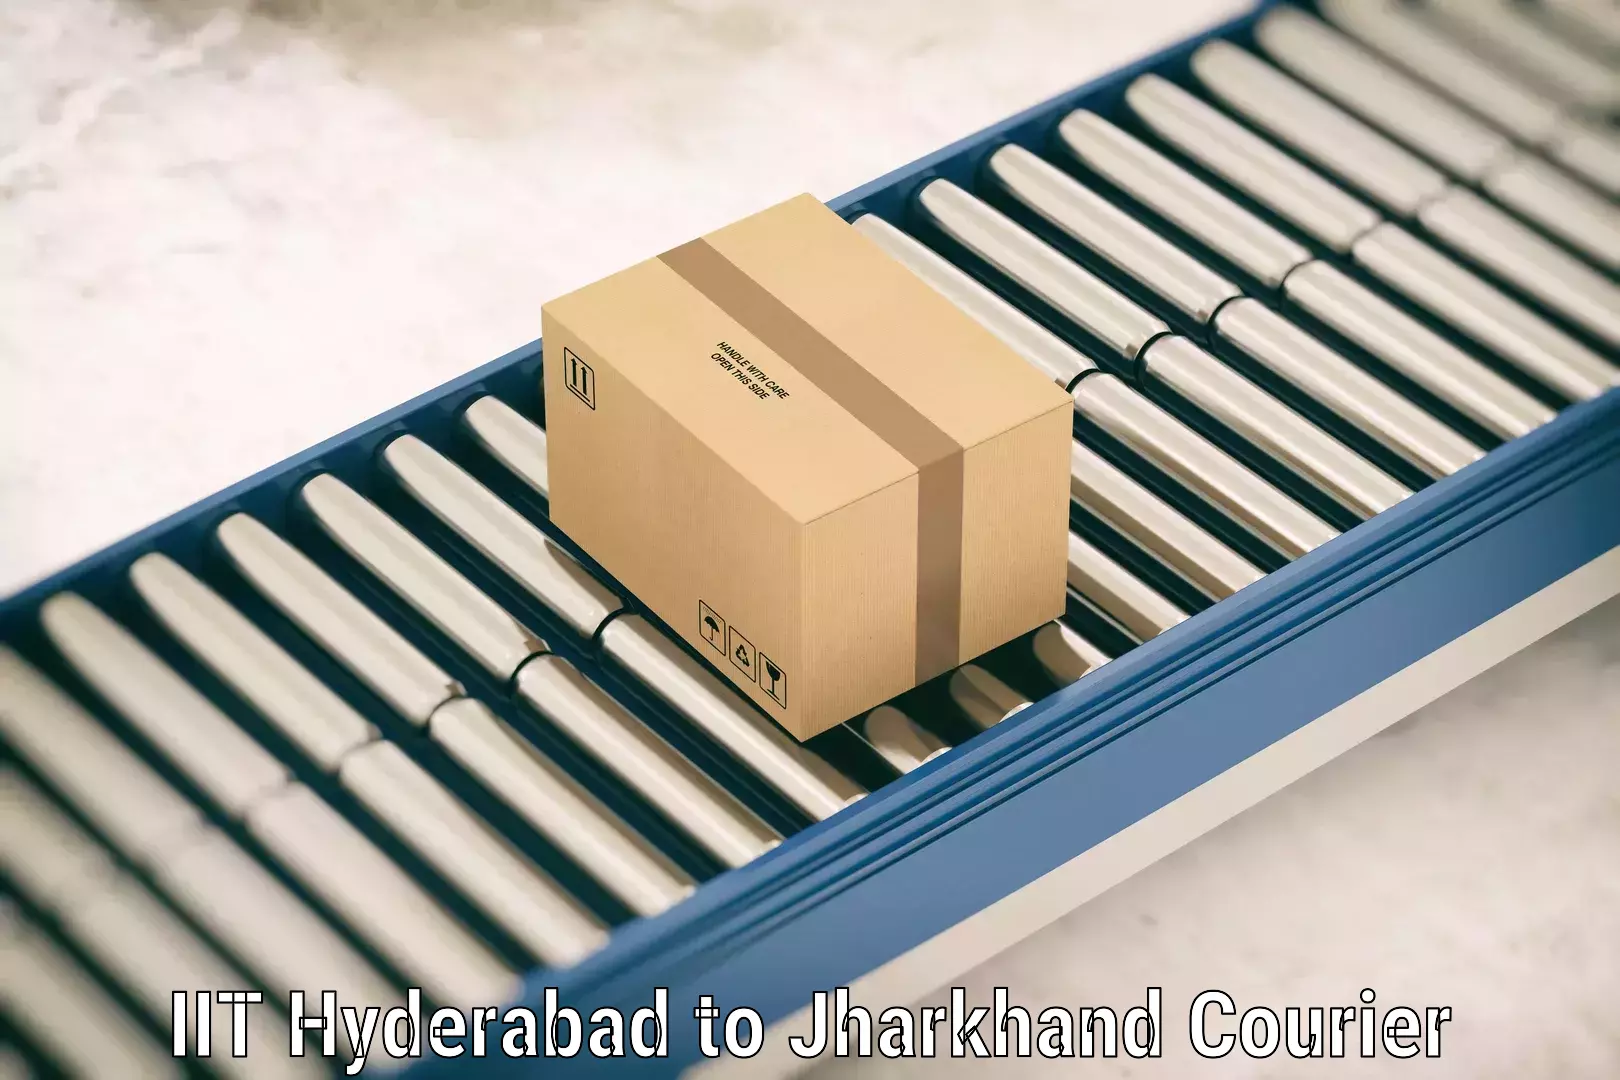 Luggage delivery solutions IIT Hyderabad to Jamshedpur